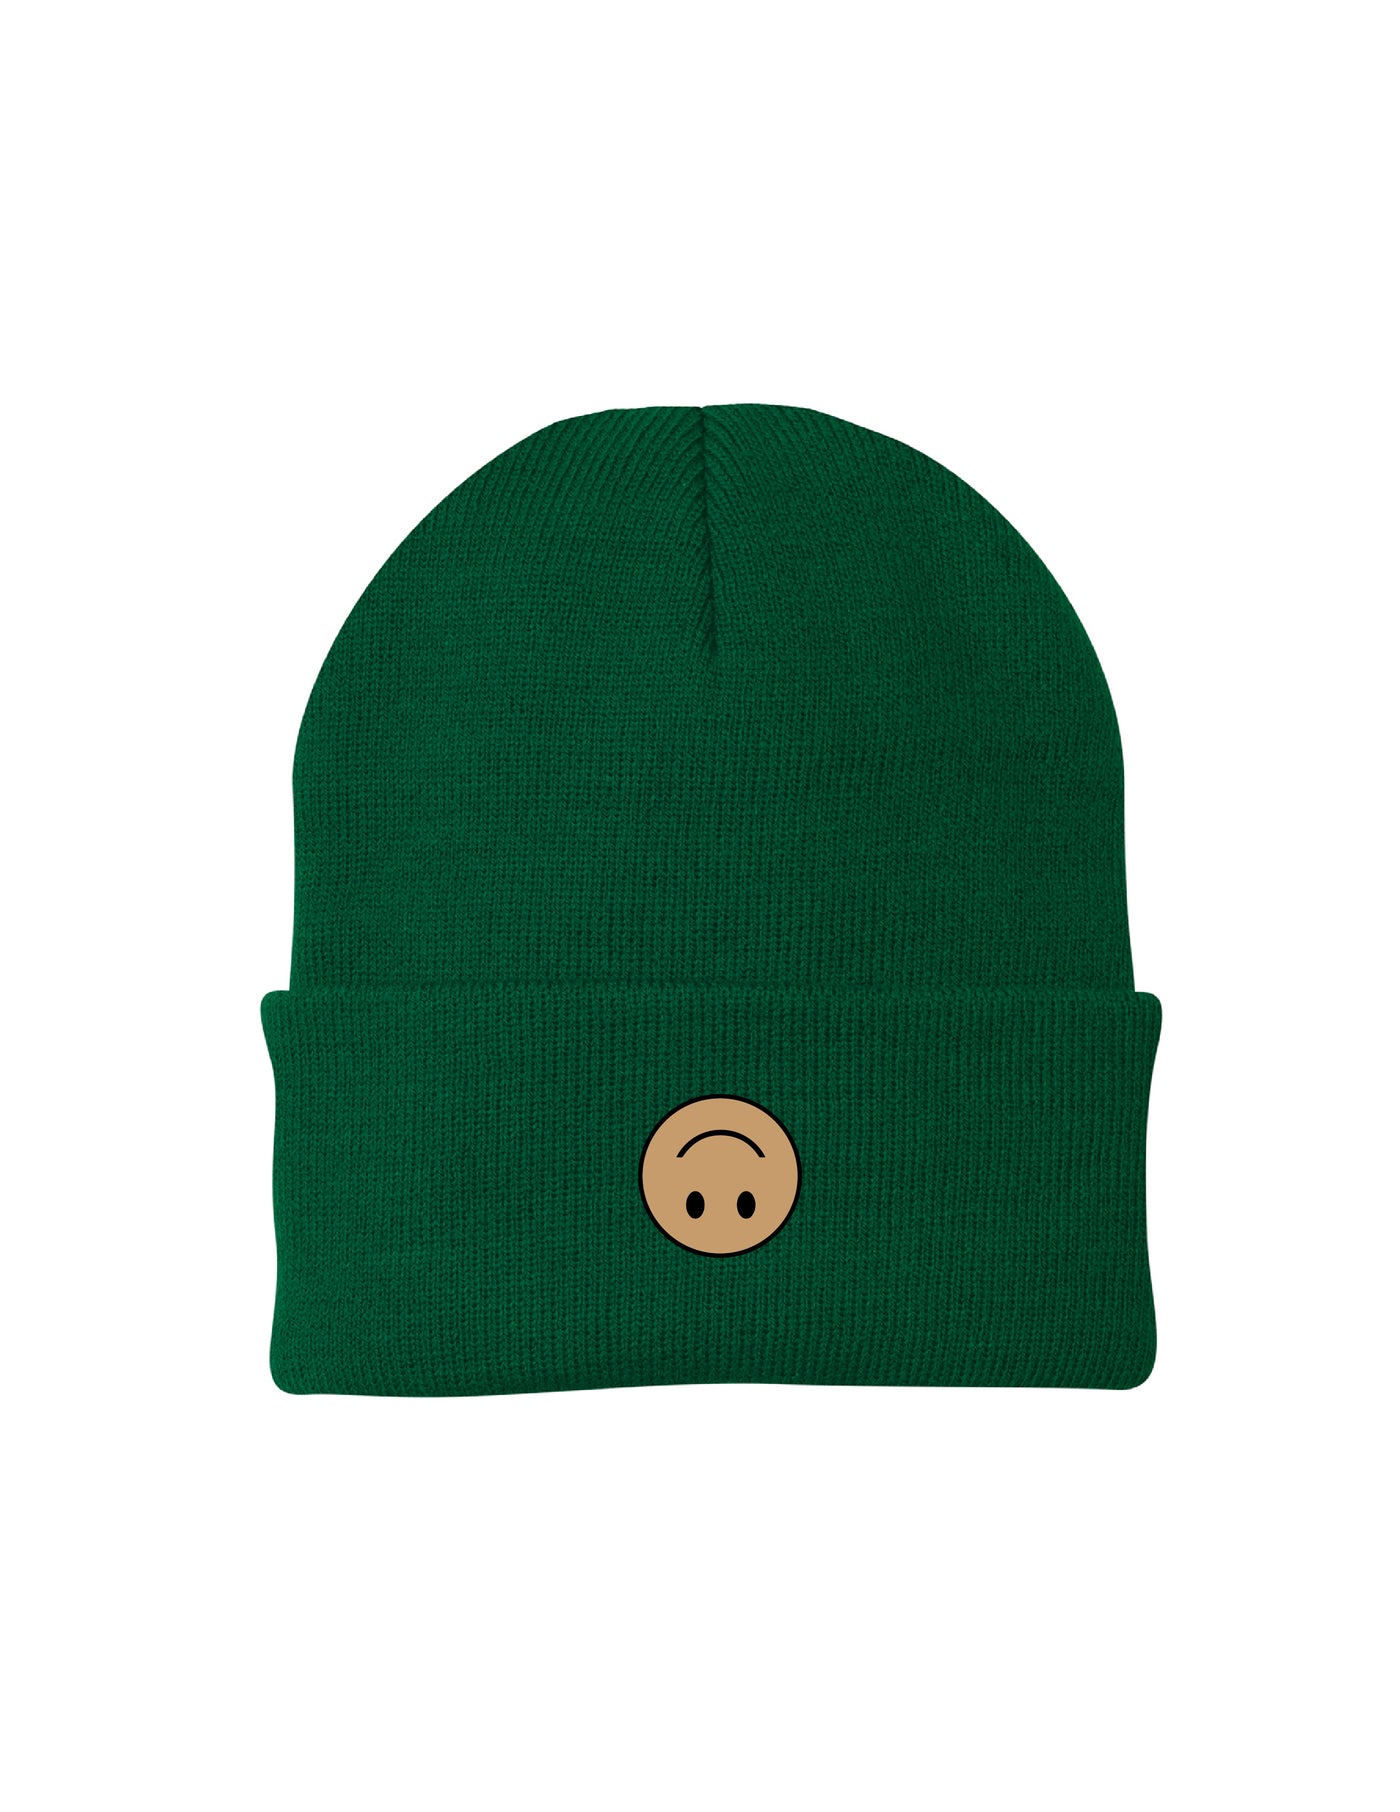 Smile Beanie - Forest Green